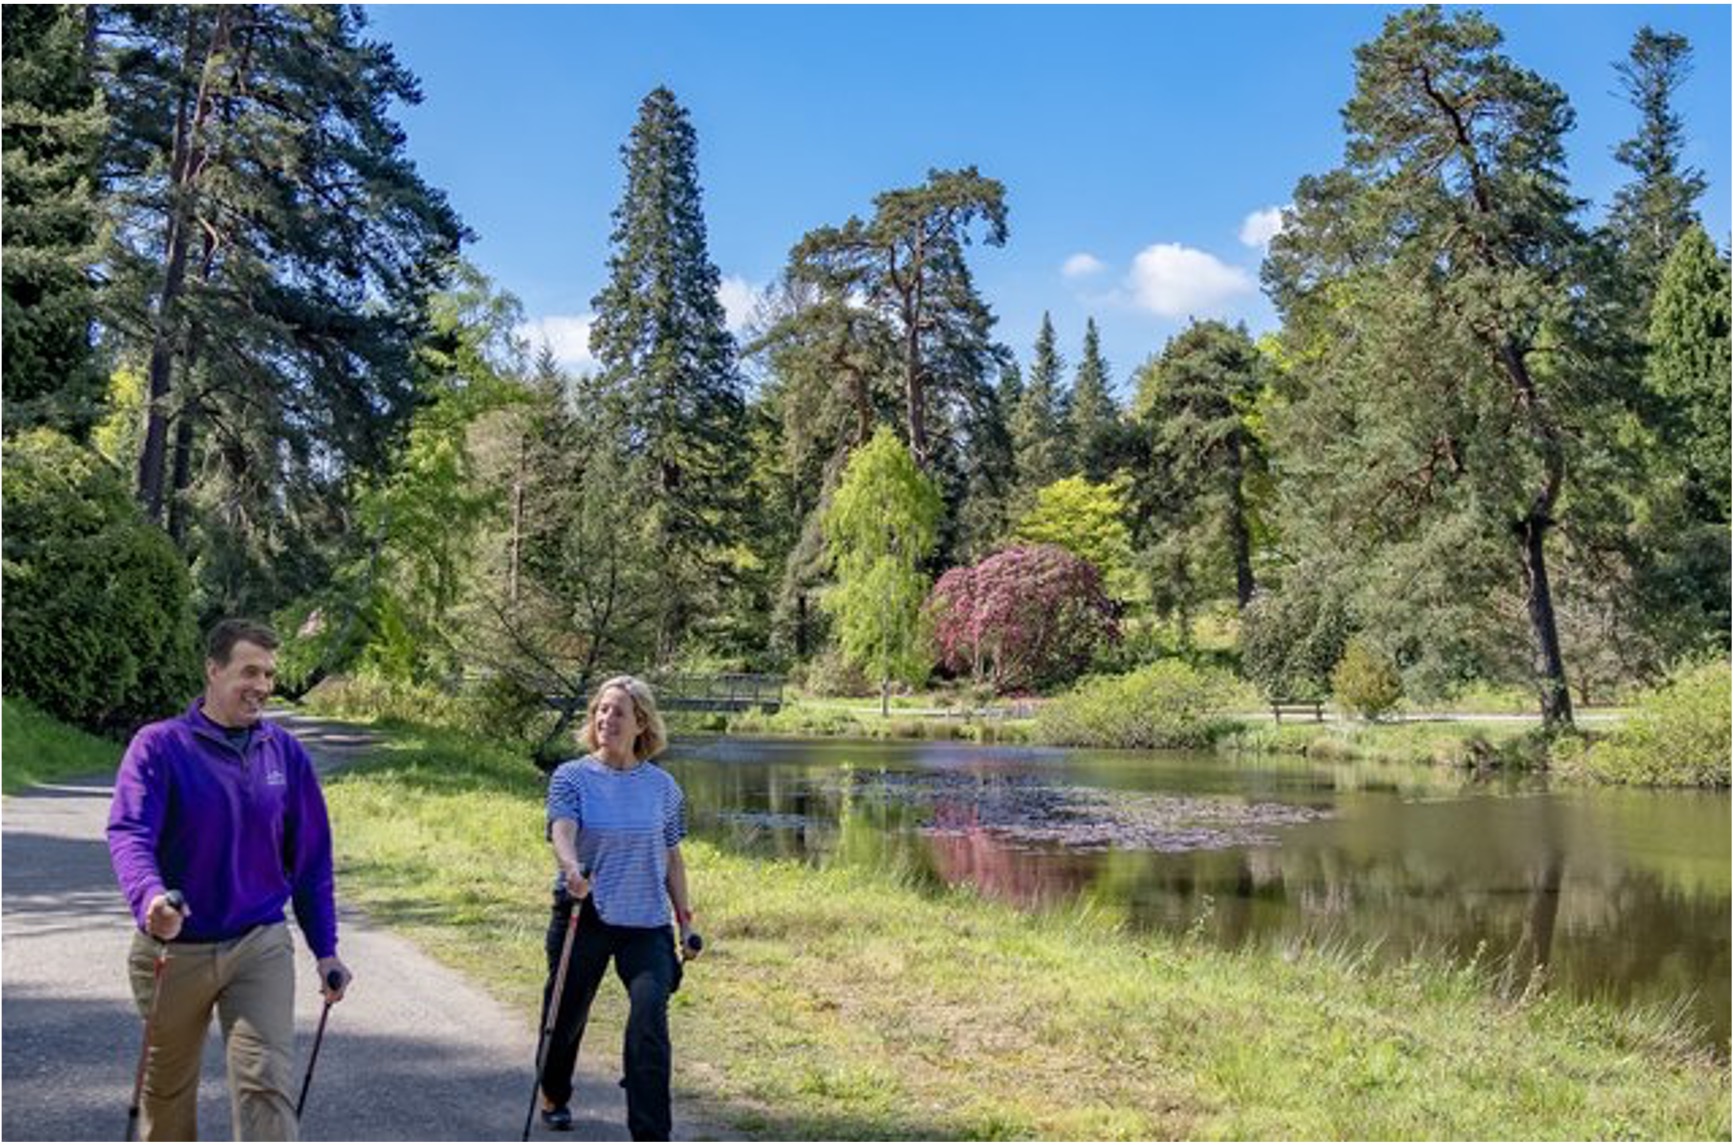 Bedgebury Pinetum - a view of the lake and impressive selection of trees.